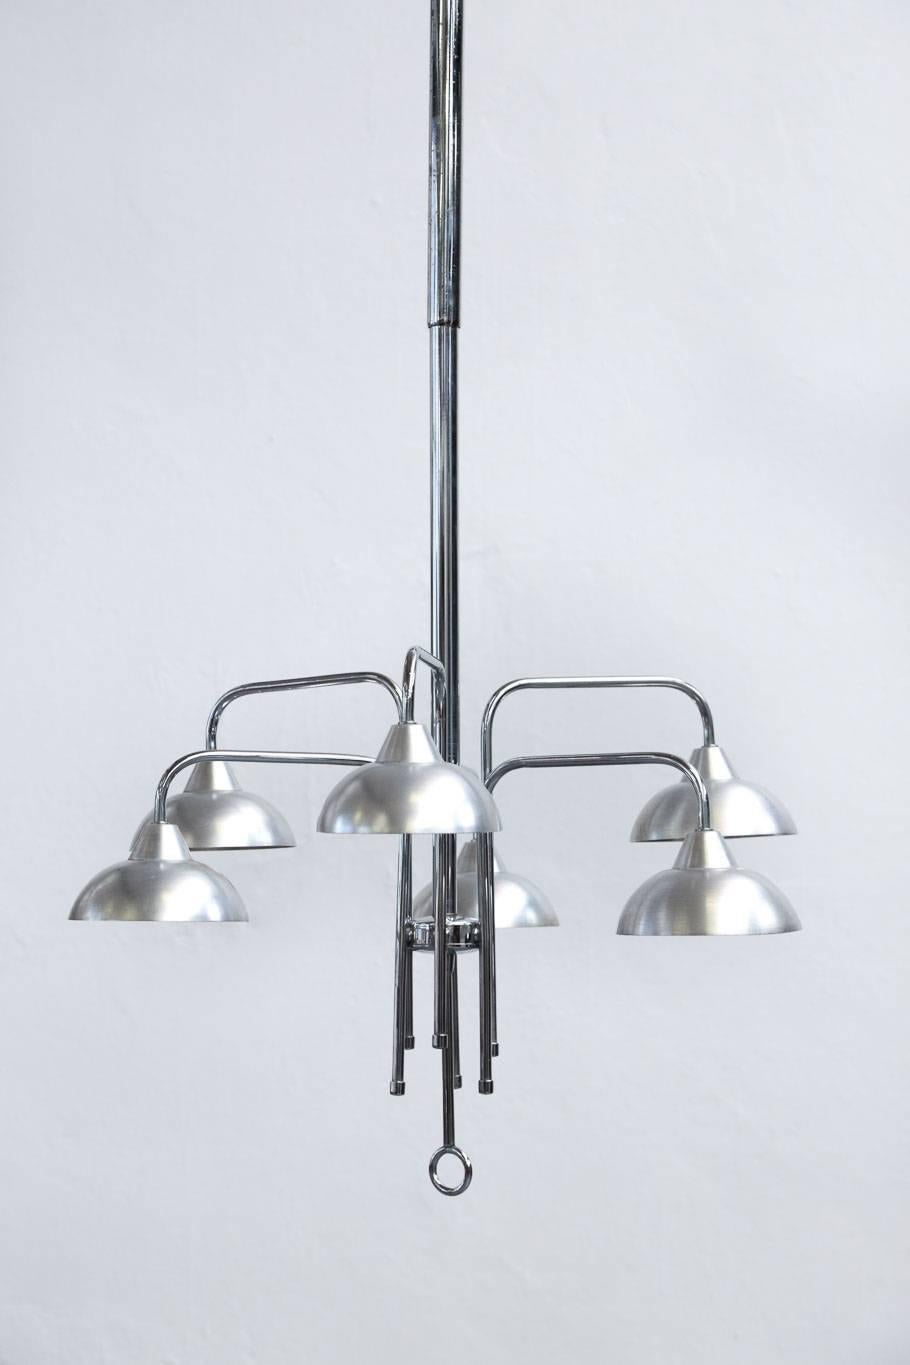 Ceiling lamp pendant, circa 1960s
System up and down telescopic.